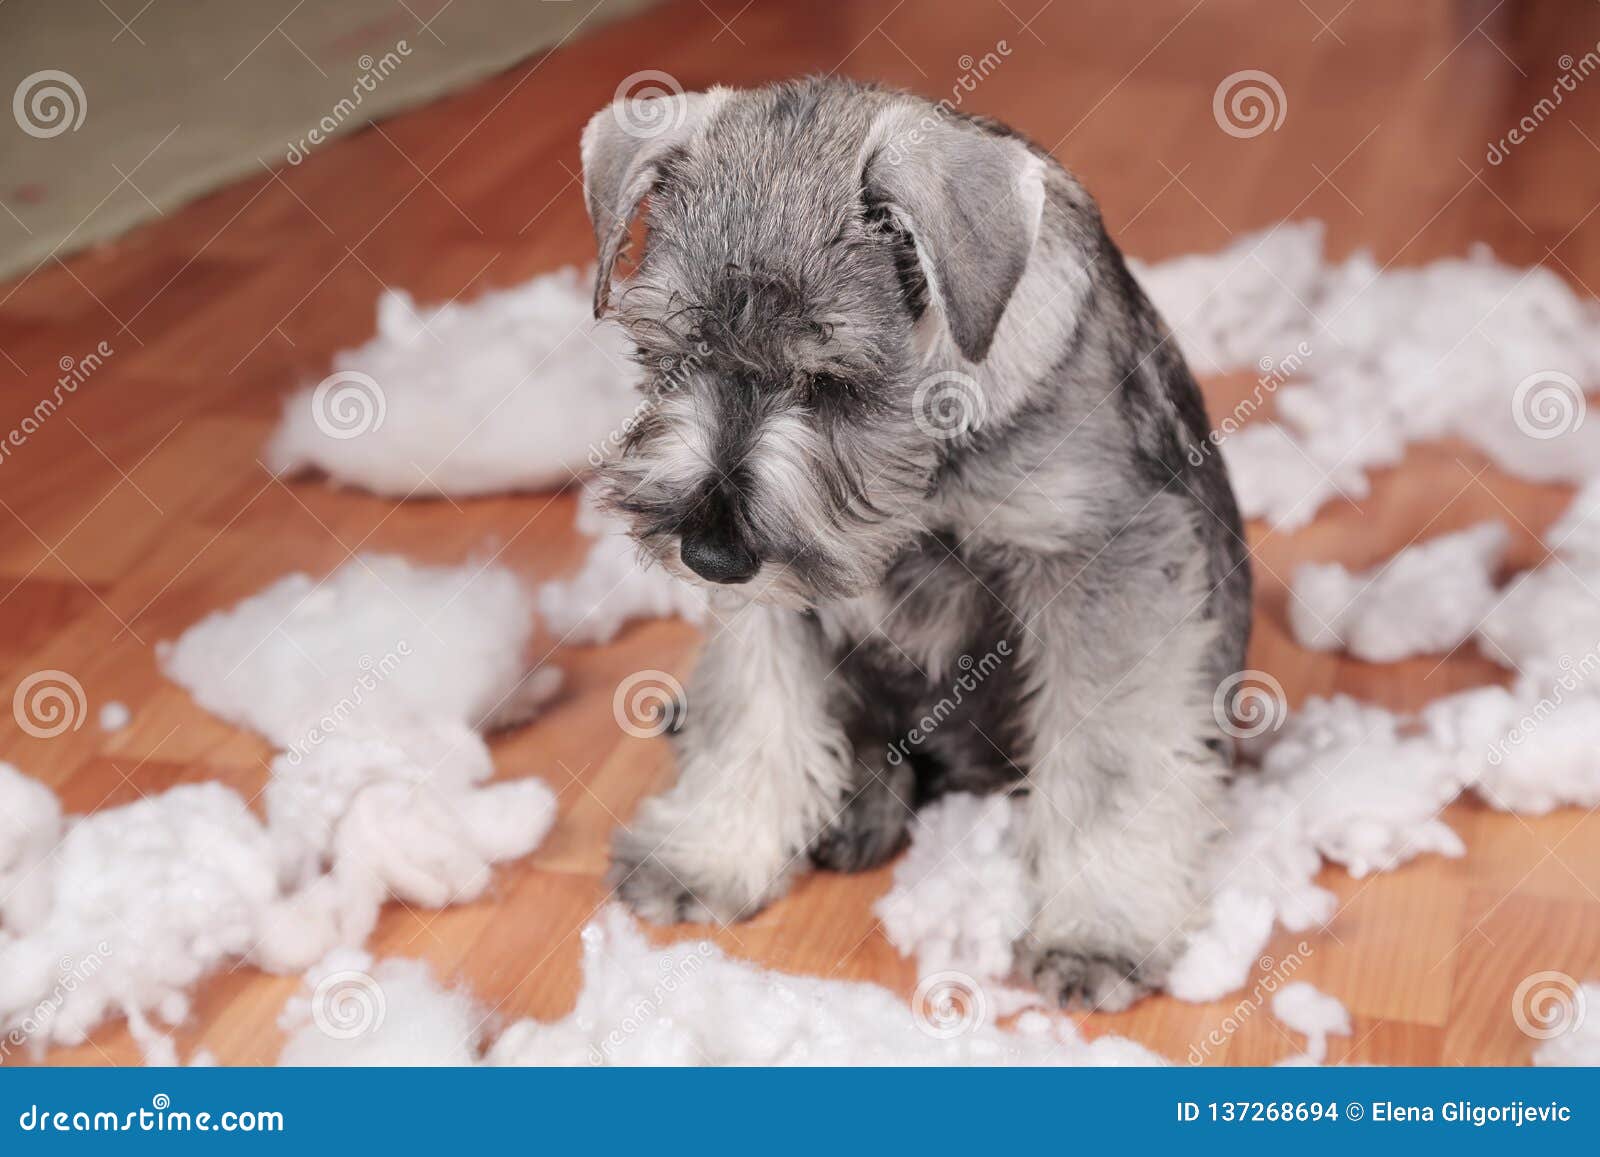 naughty bad cute schnauzer puppy dog made a mess at home, destroyed plush toy. the dog is home alone.